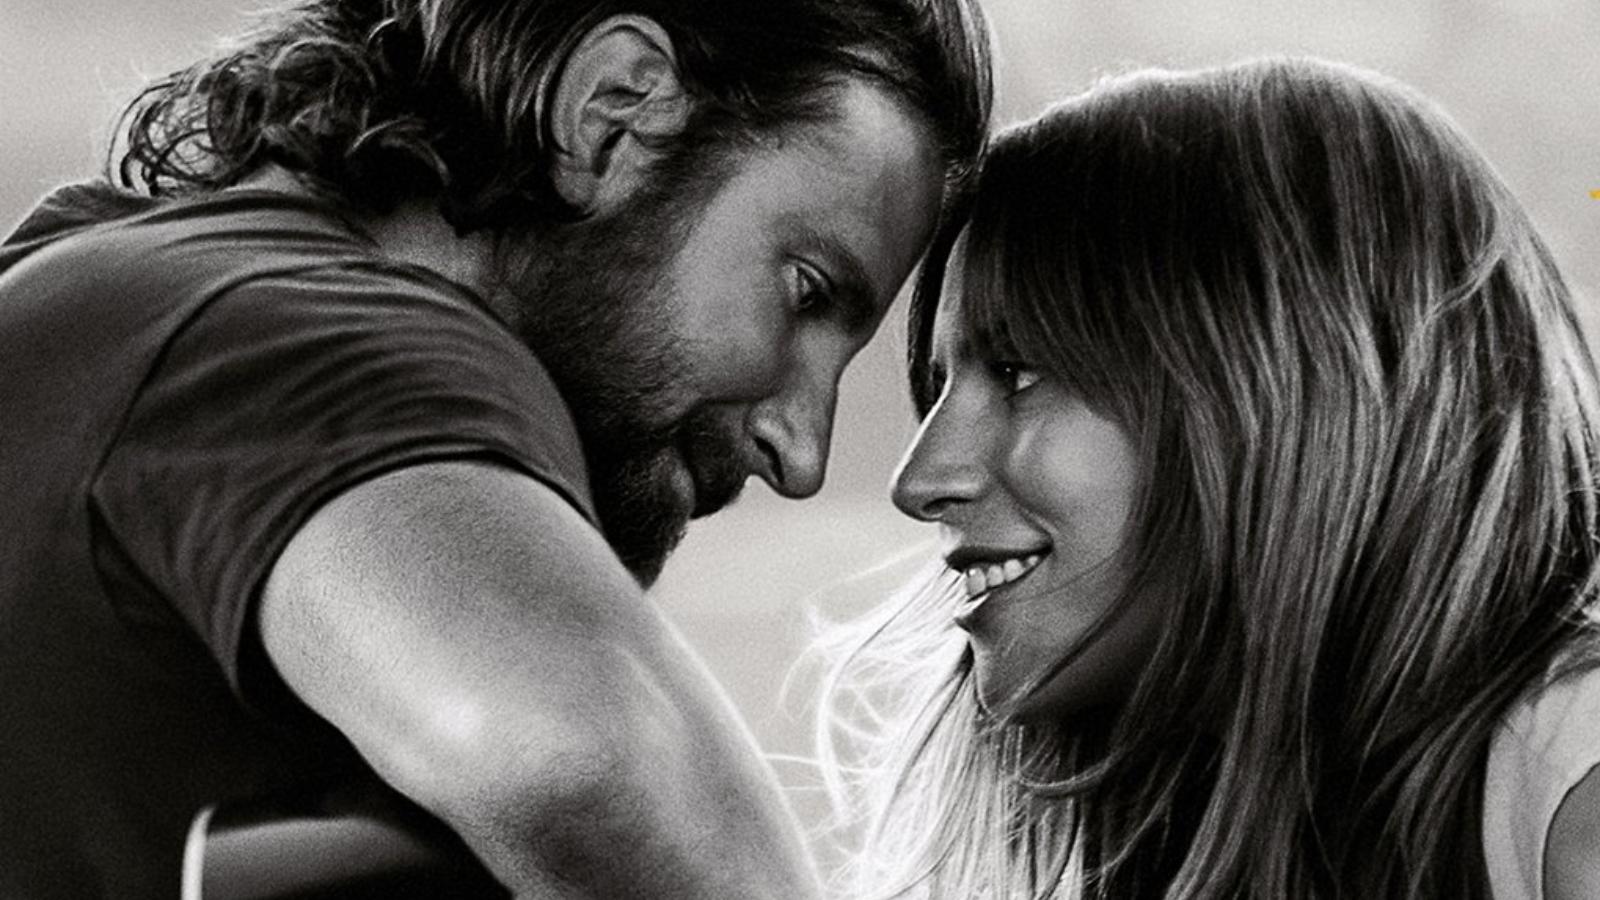 a star is born mp4 download torrent